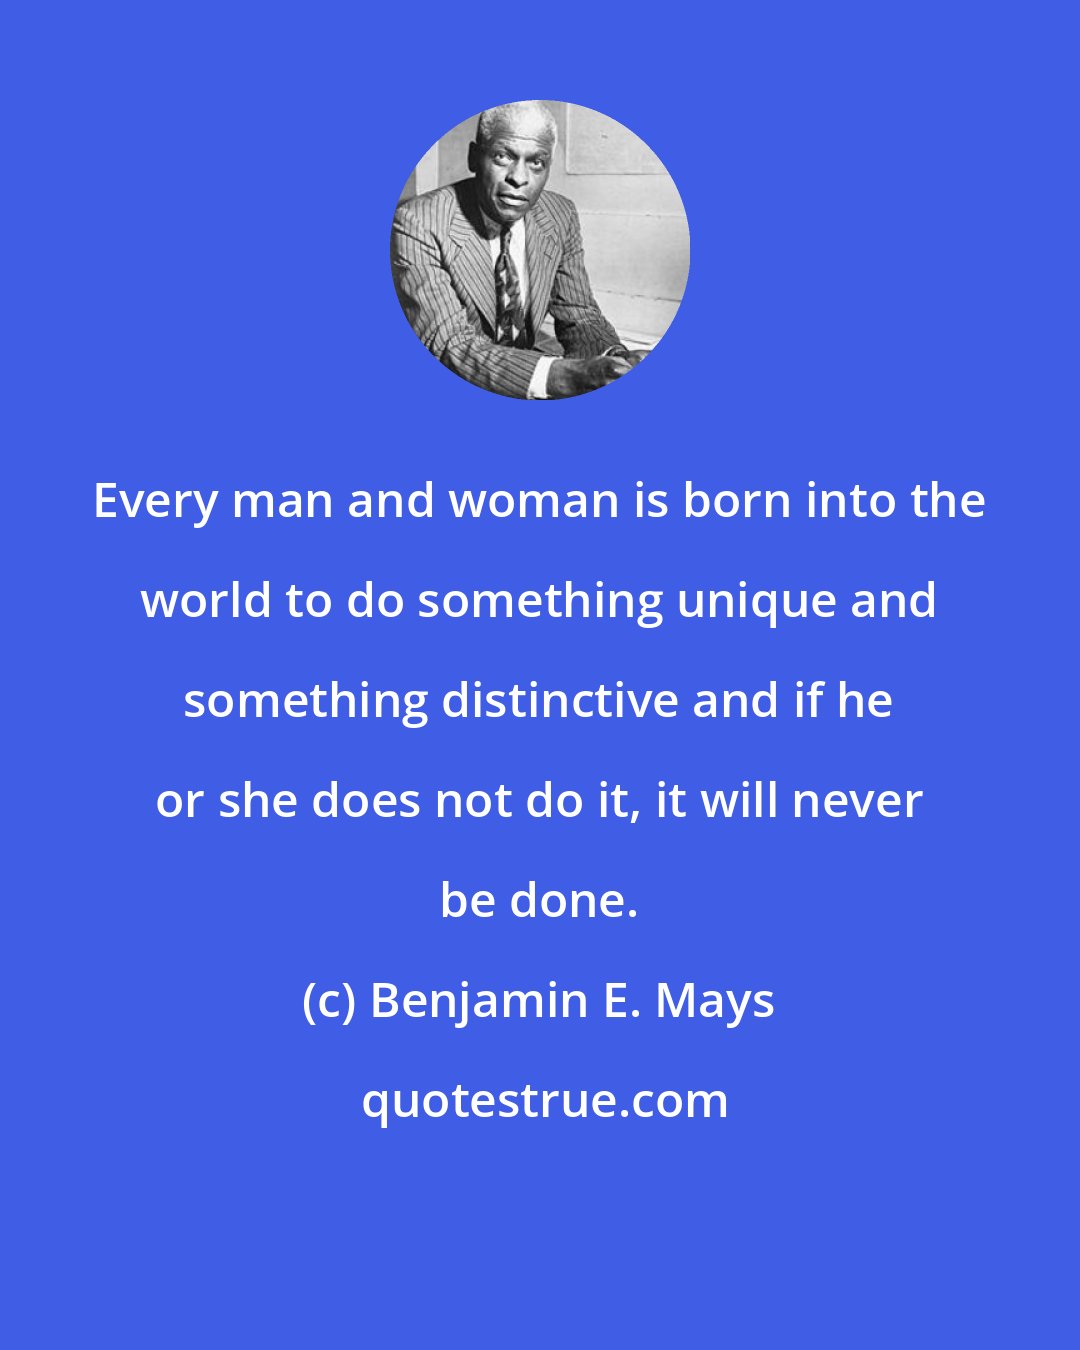 Benjamin E. Mays: Every man and woman is born into the world to do something unique and something distinctive and if he or she does not do it, it will never be done.